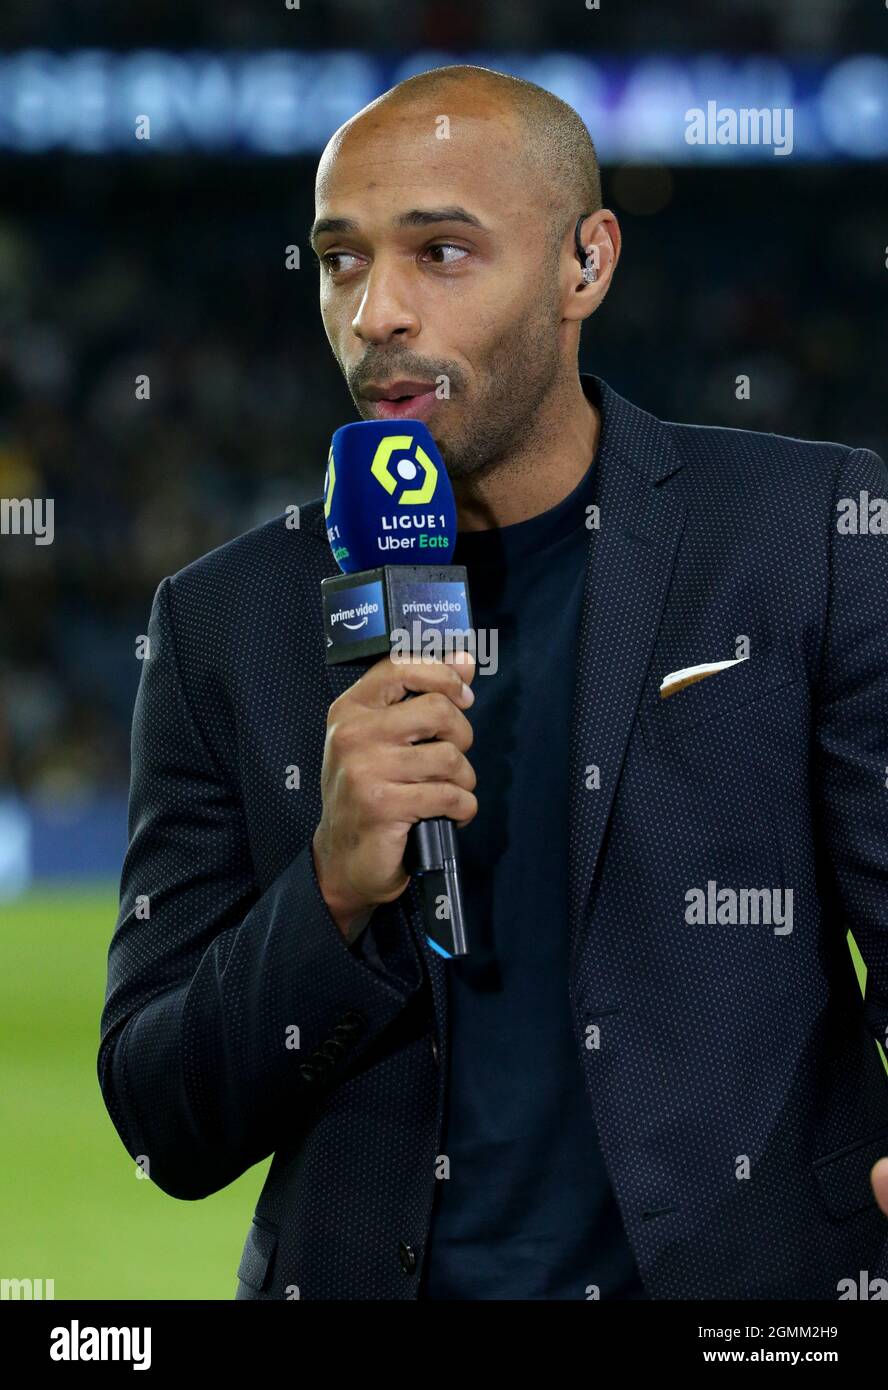 Paris, France. 19th Sep, 2021. Thierry Henry, pundit for Amazon Prime,  comments the French championship Ligue 1 football match between Paris Saint- Germain (PSG) and Olympique Lyonnais on September 19, 2021 at Parc